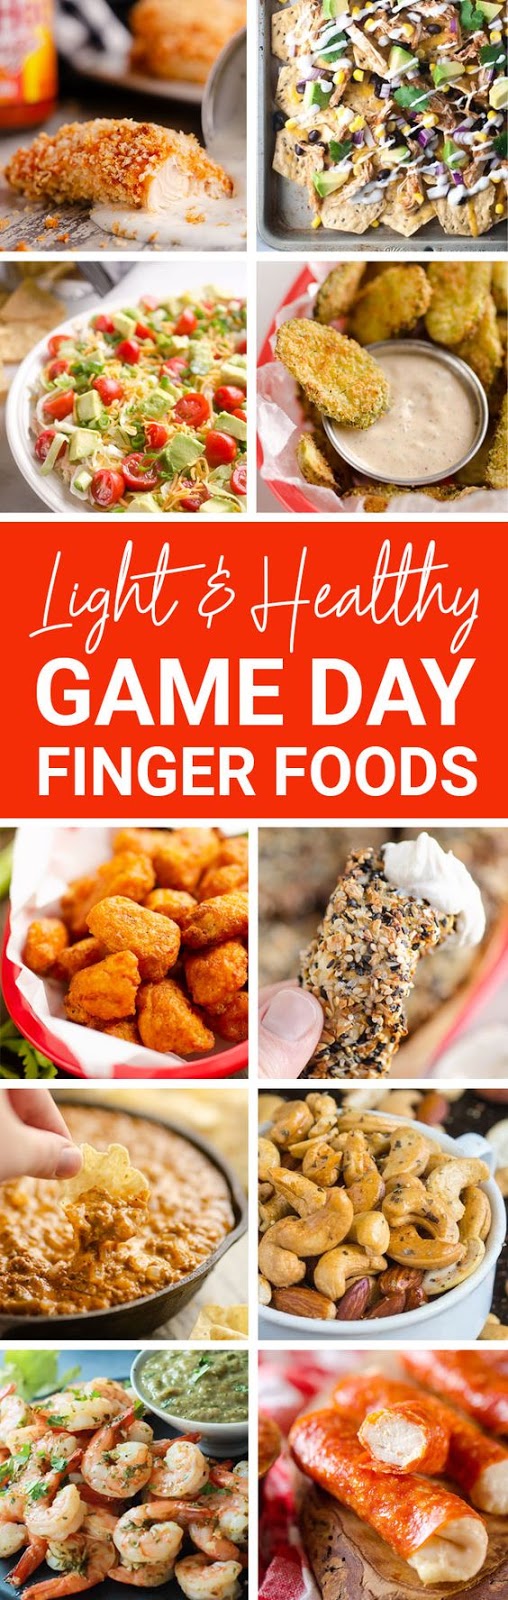 Healthy Game Day Finger Foods - stuffinco-recipes